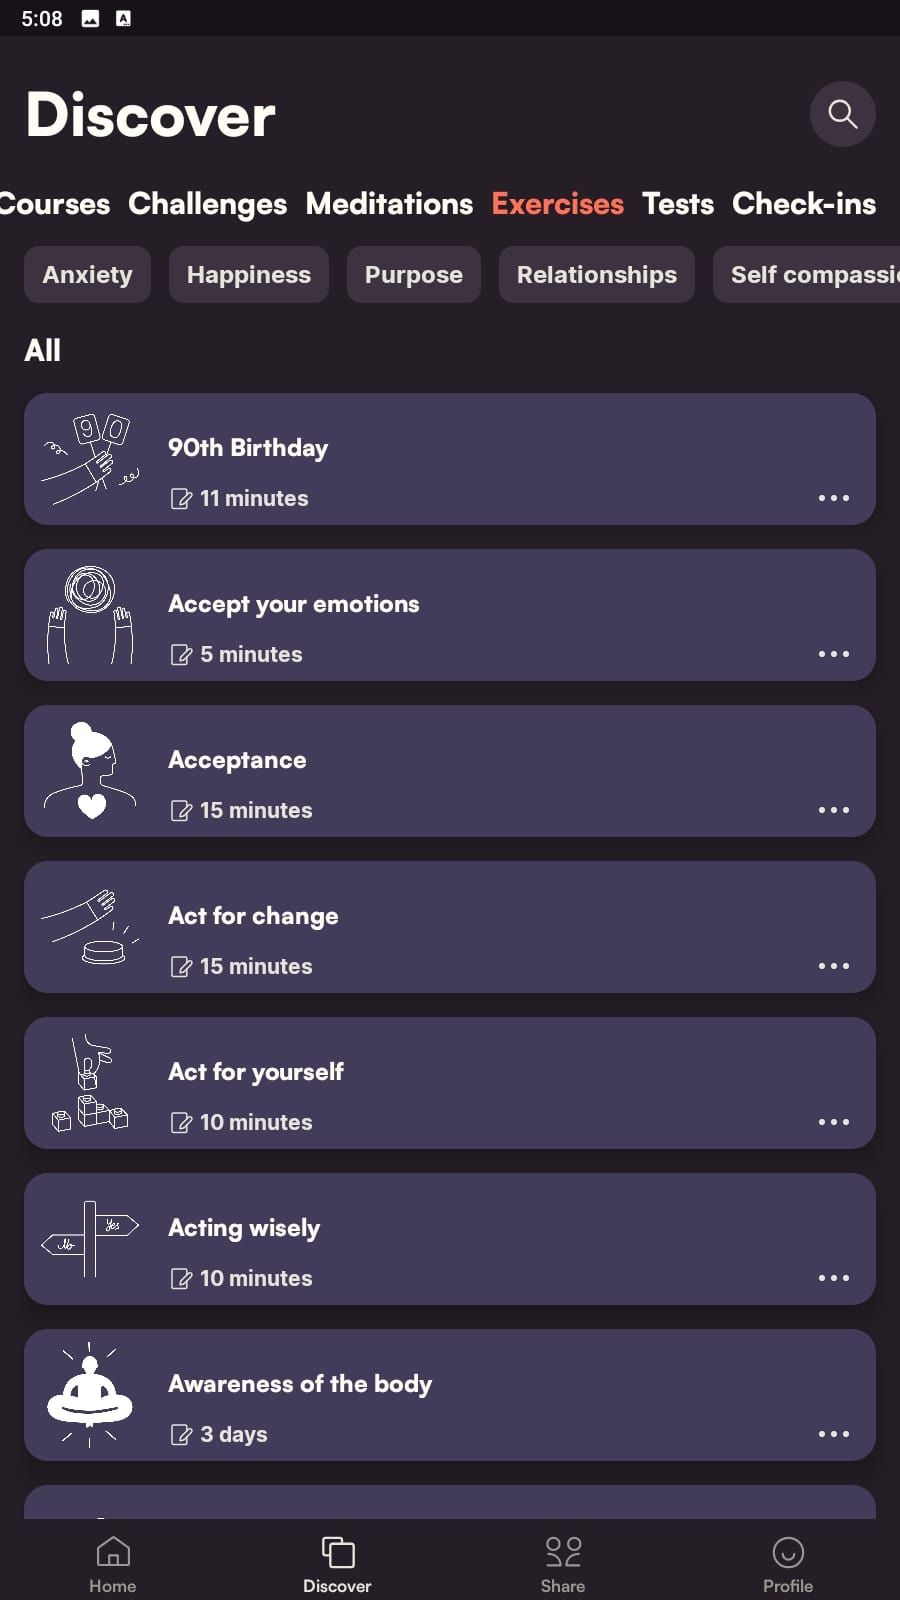 Exercises in the 29k app